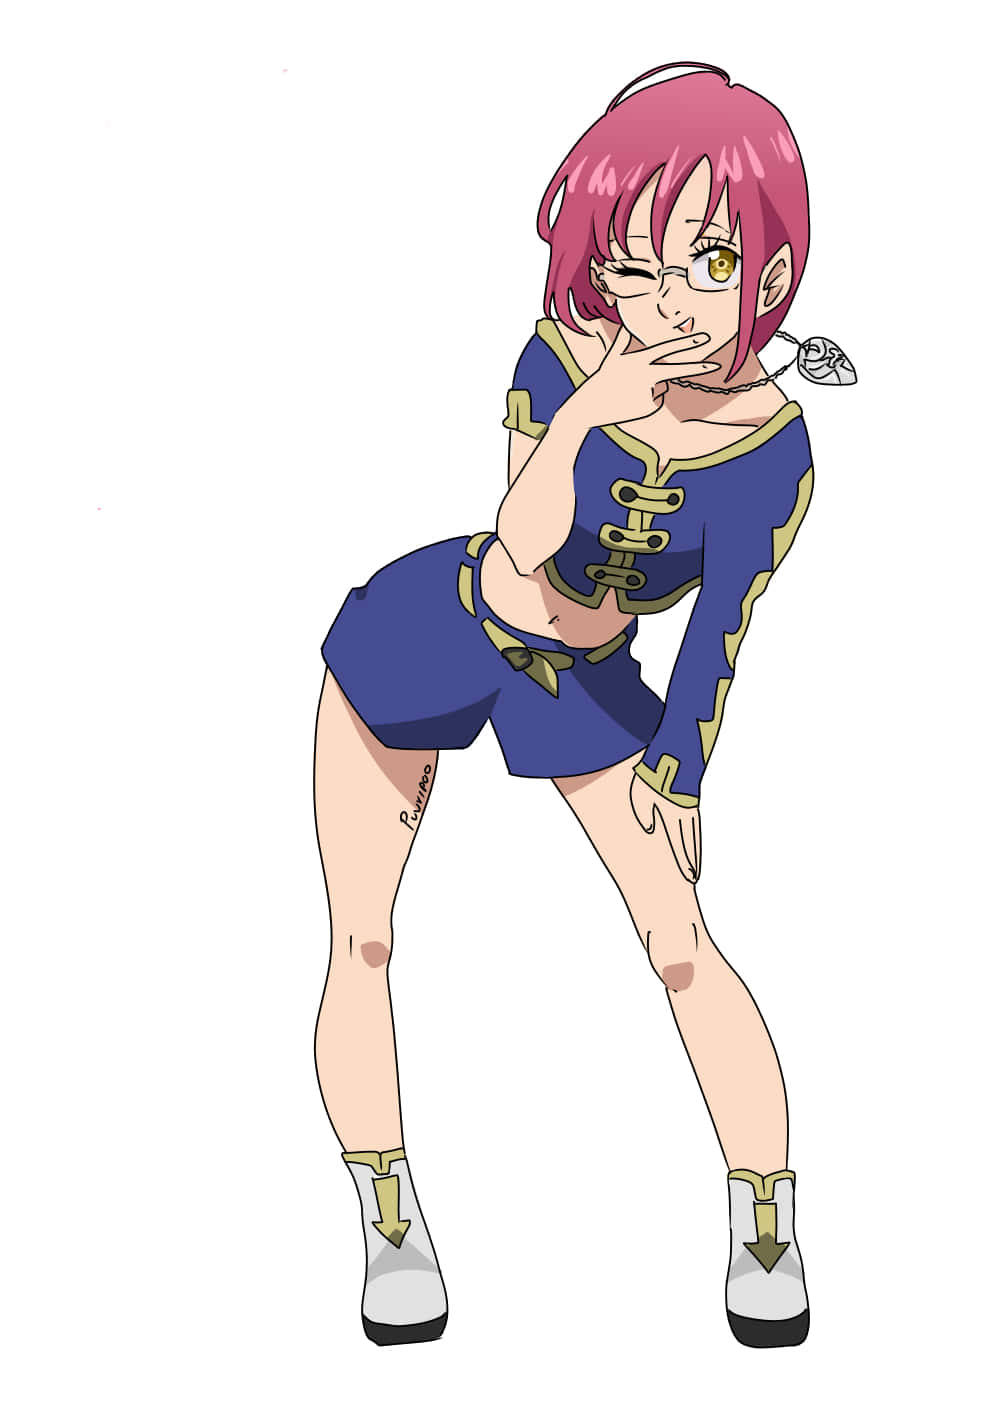 Sir Gowther The Seven Deadly Sins Goat, nanatsu no taizai, love, child,  text png | PNGWing